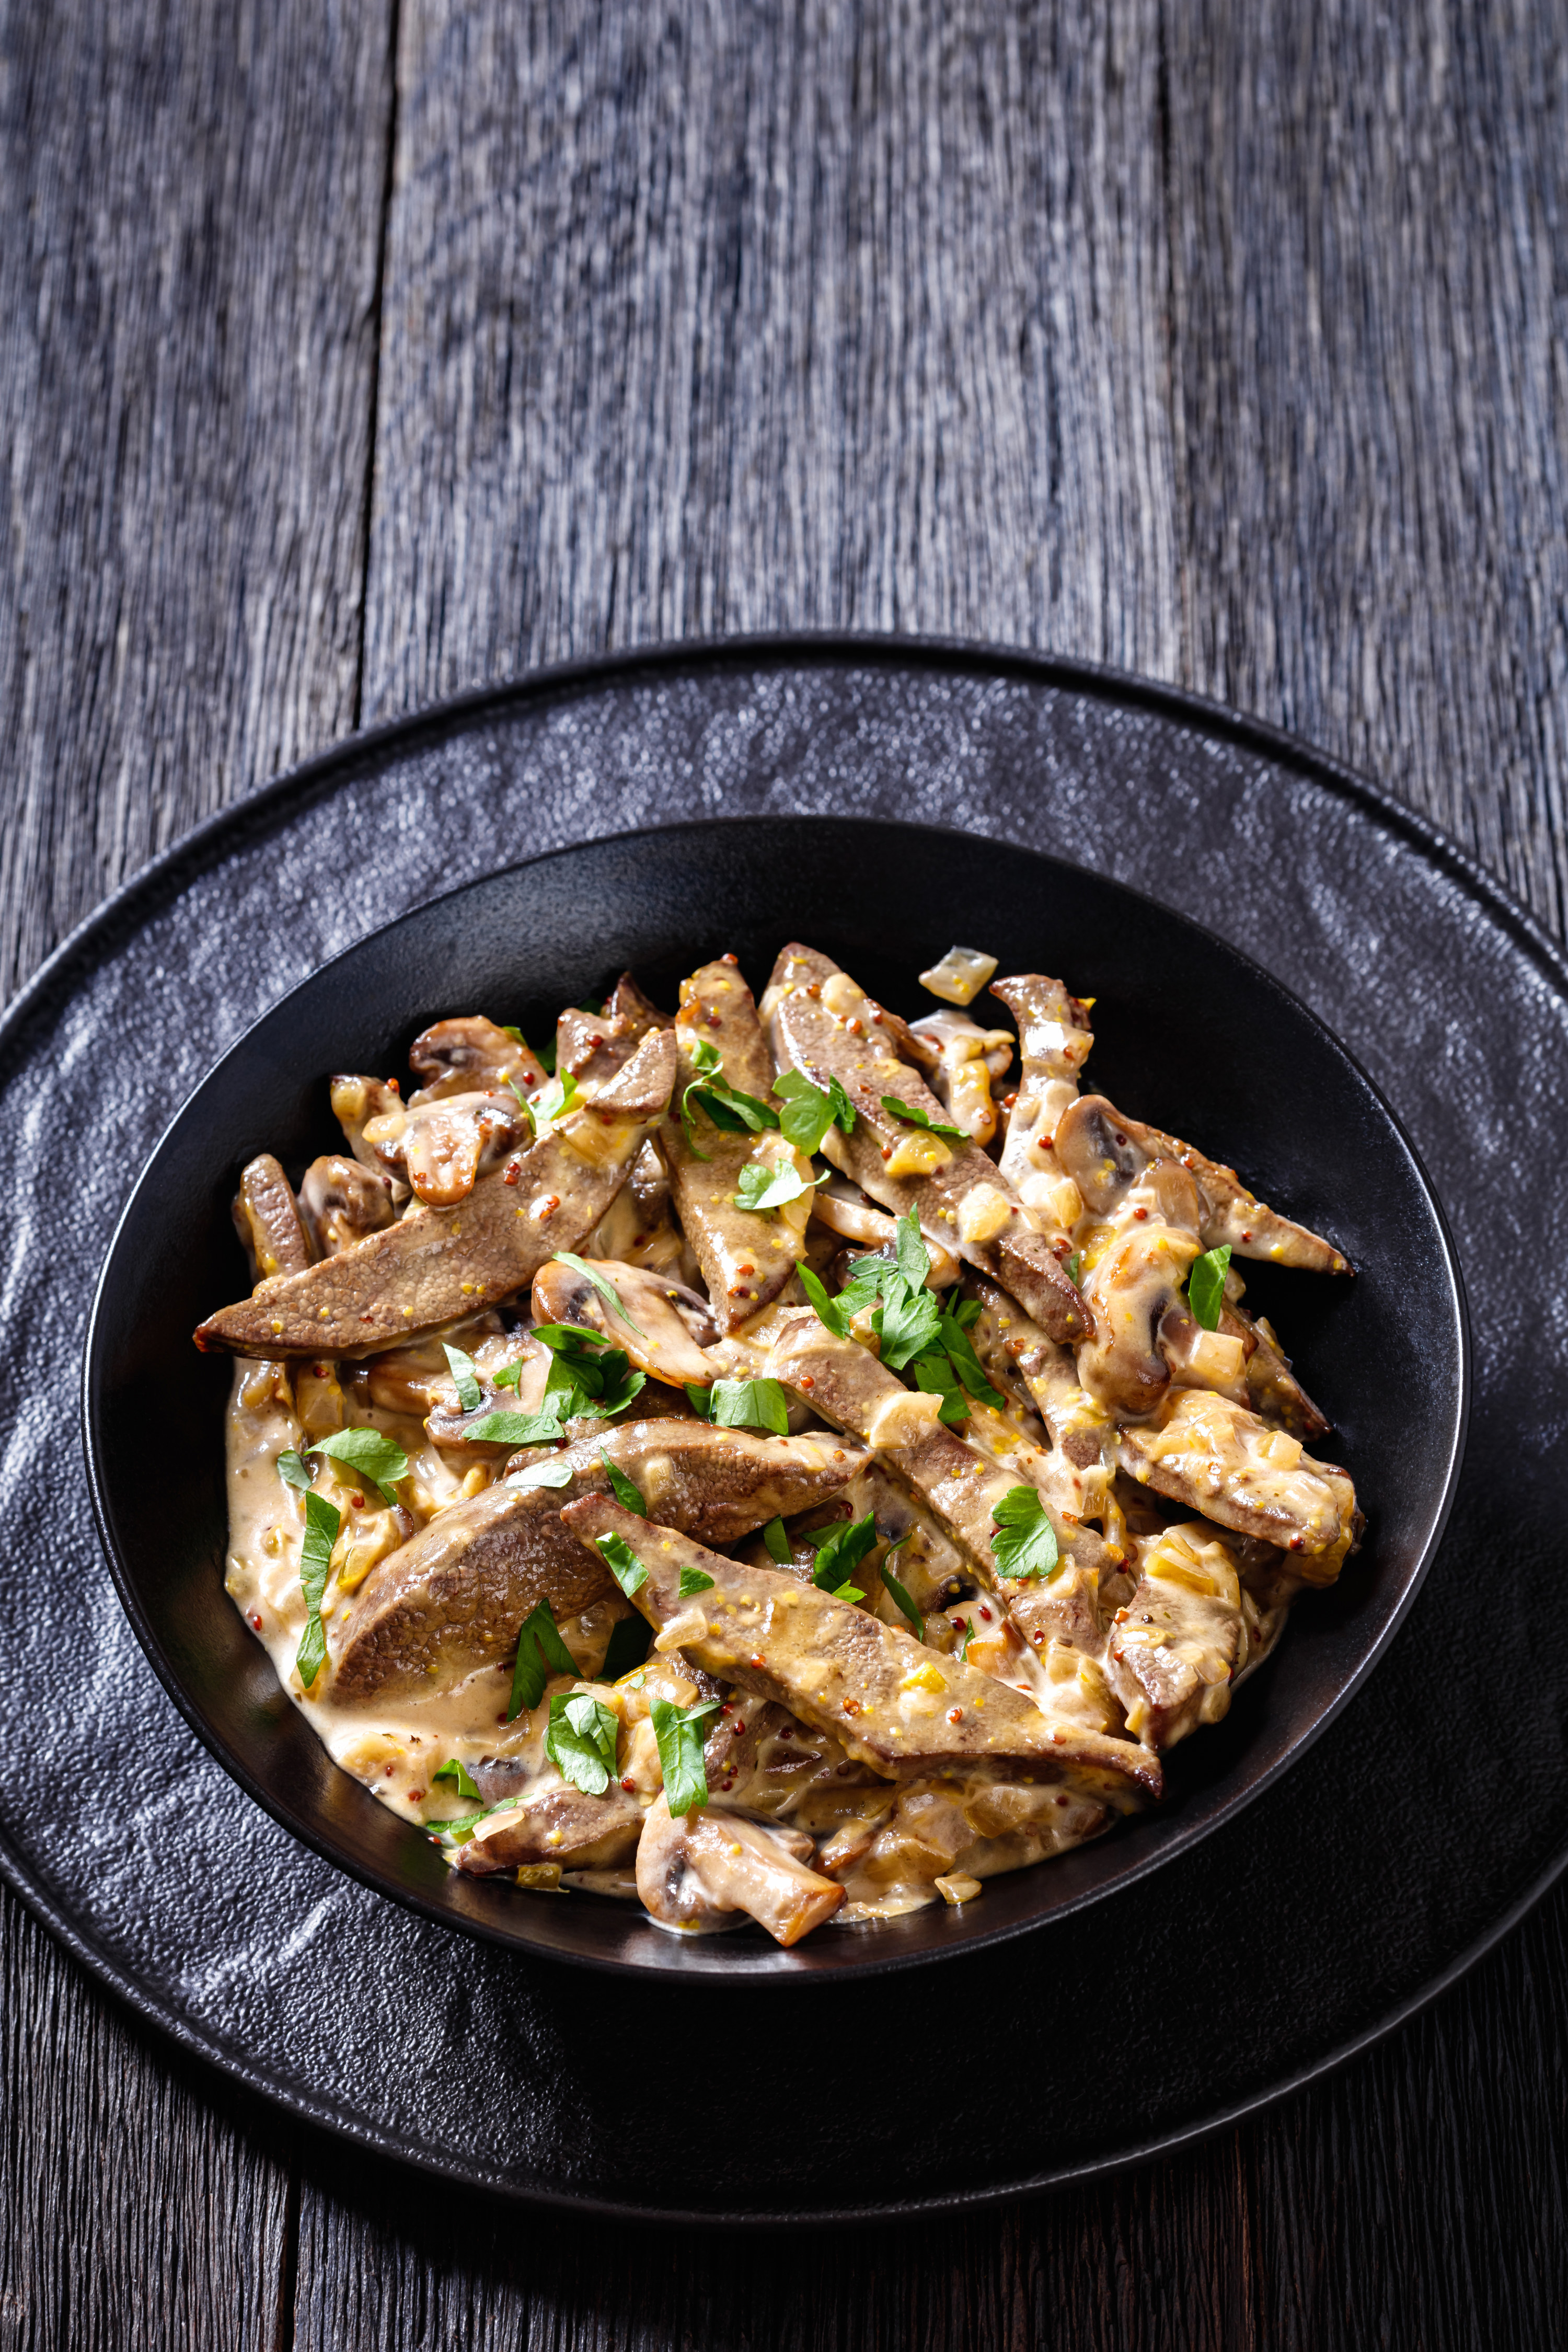 Beef stroganoff on a plate